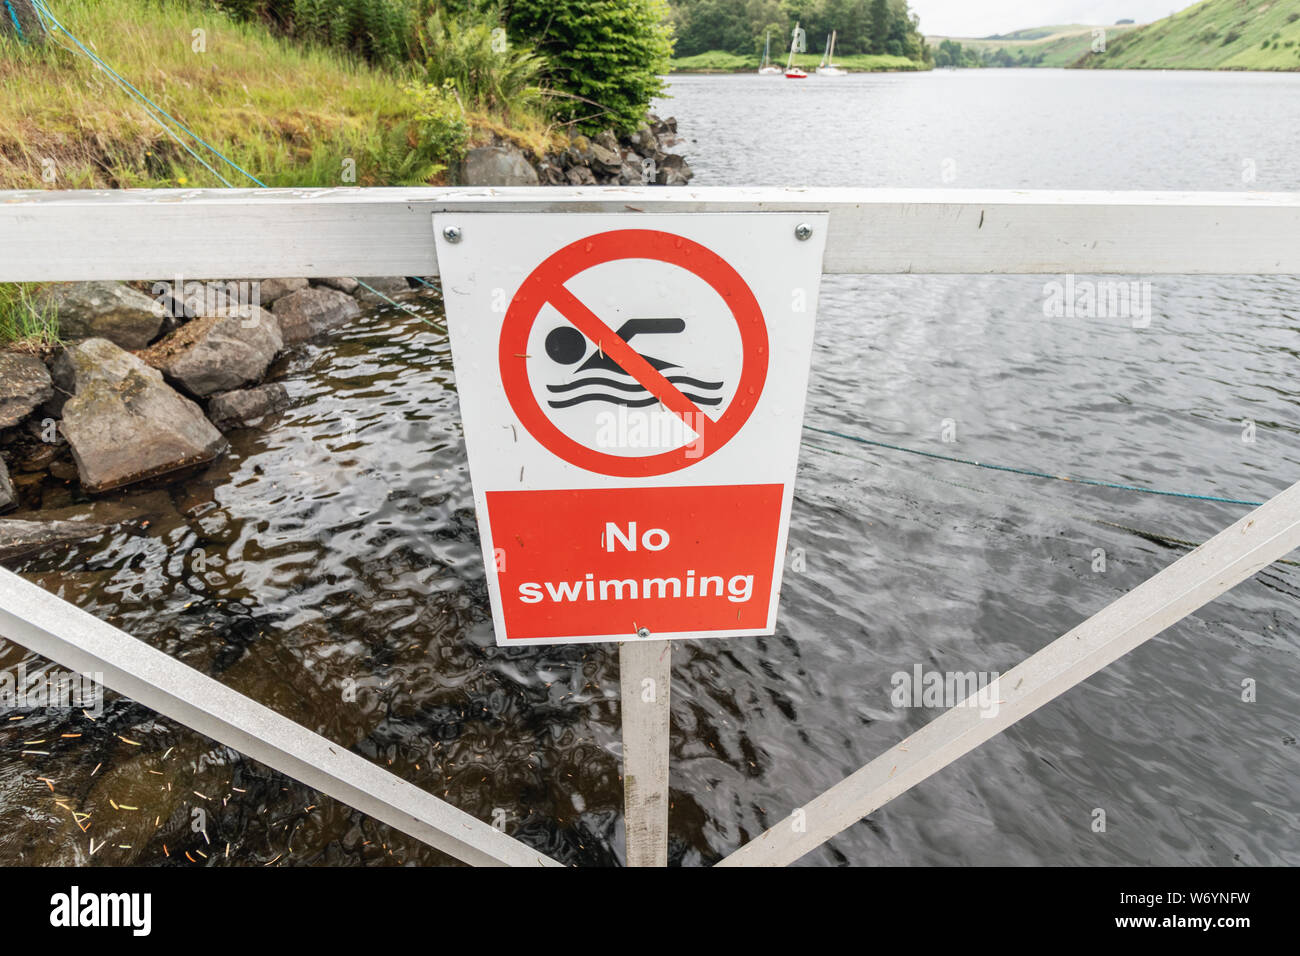 No swimming sign at a boating lake in Wales, in front of rippling water Stock Photo